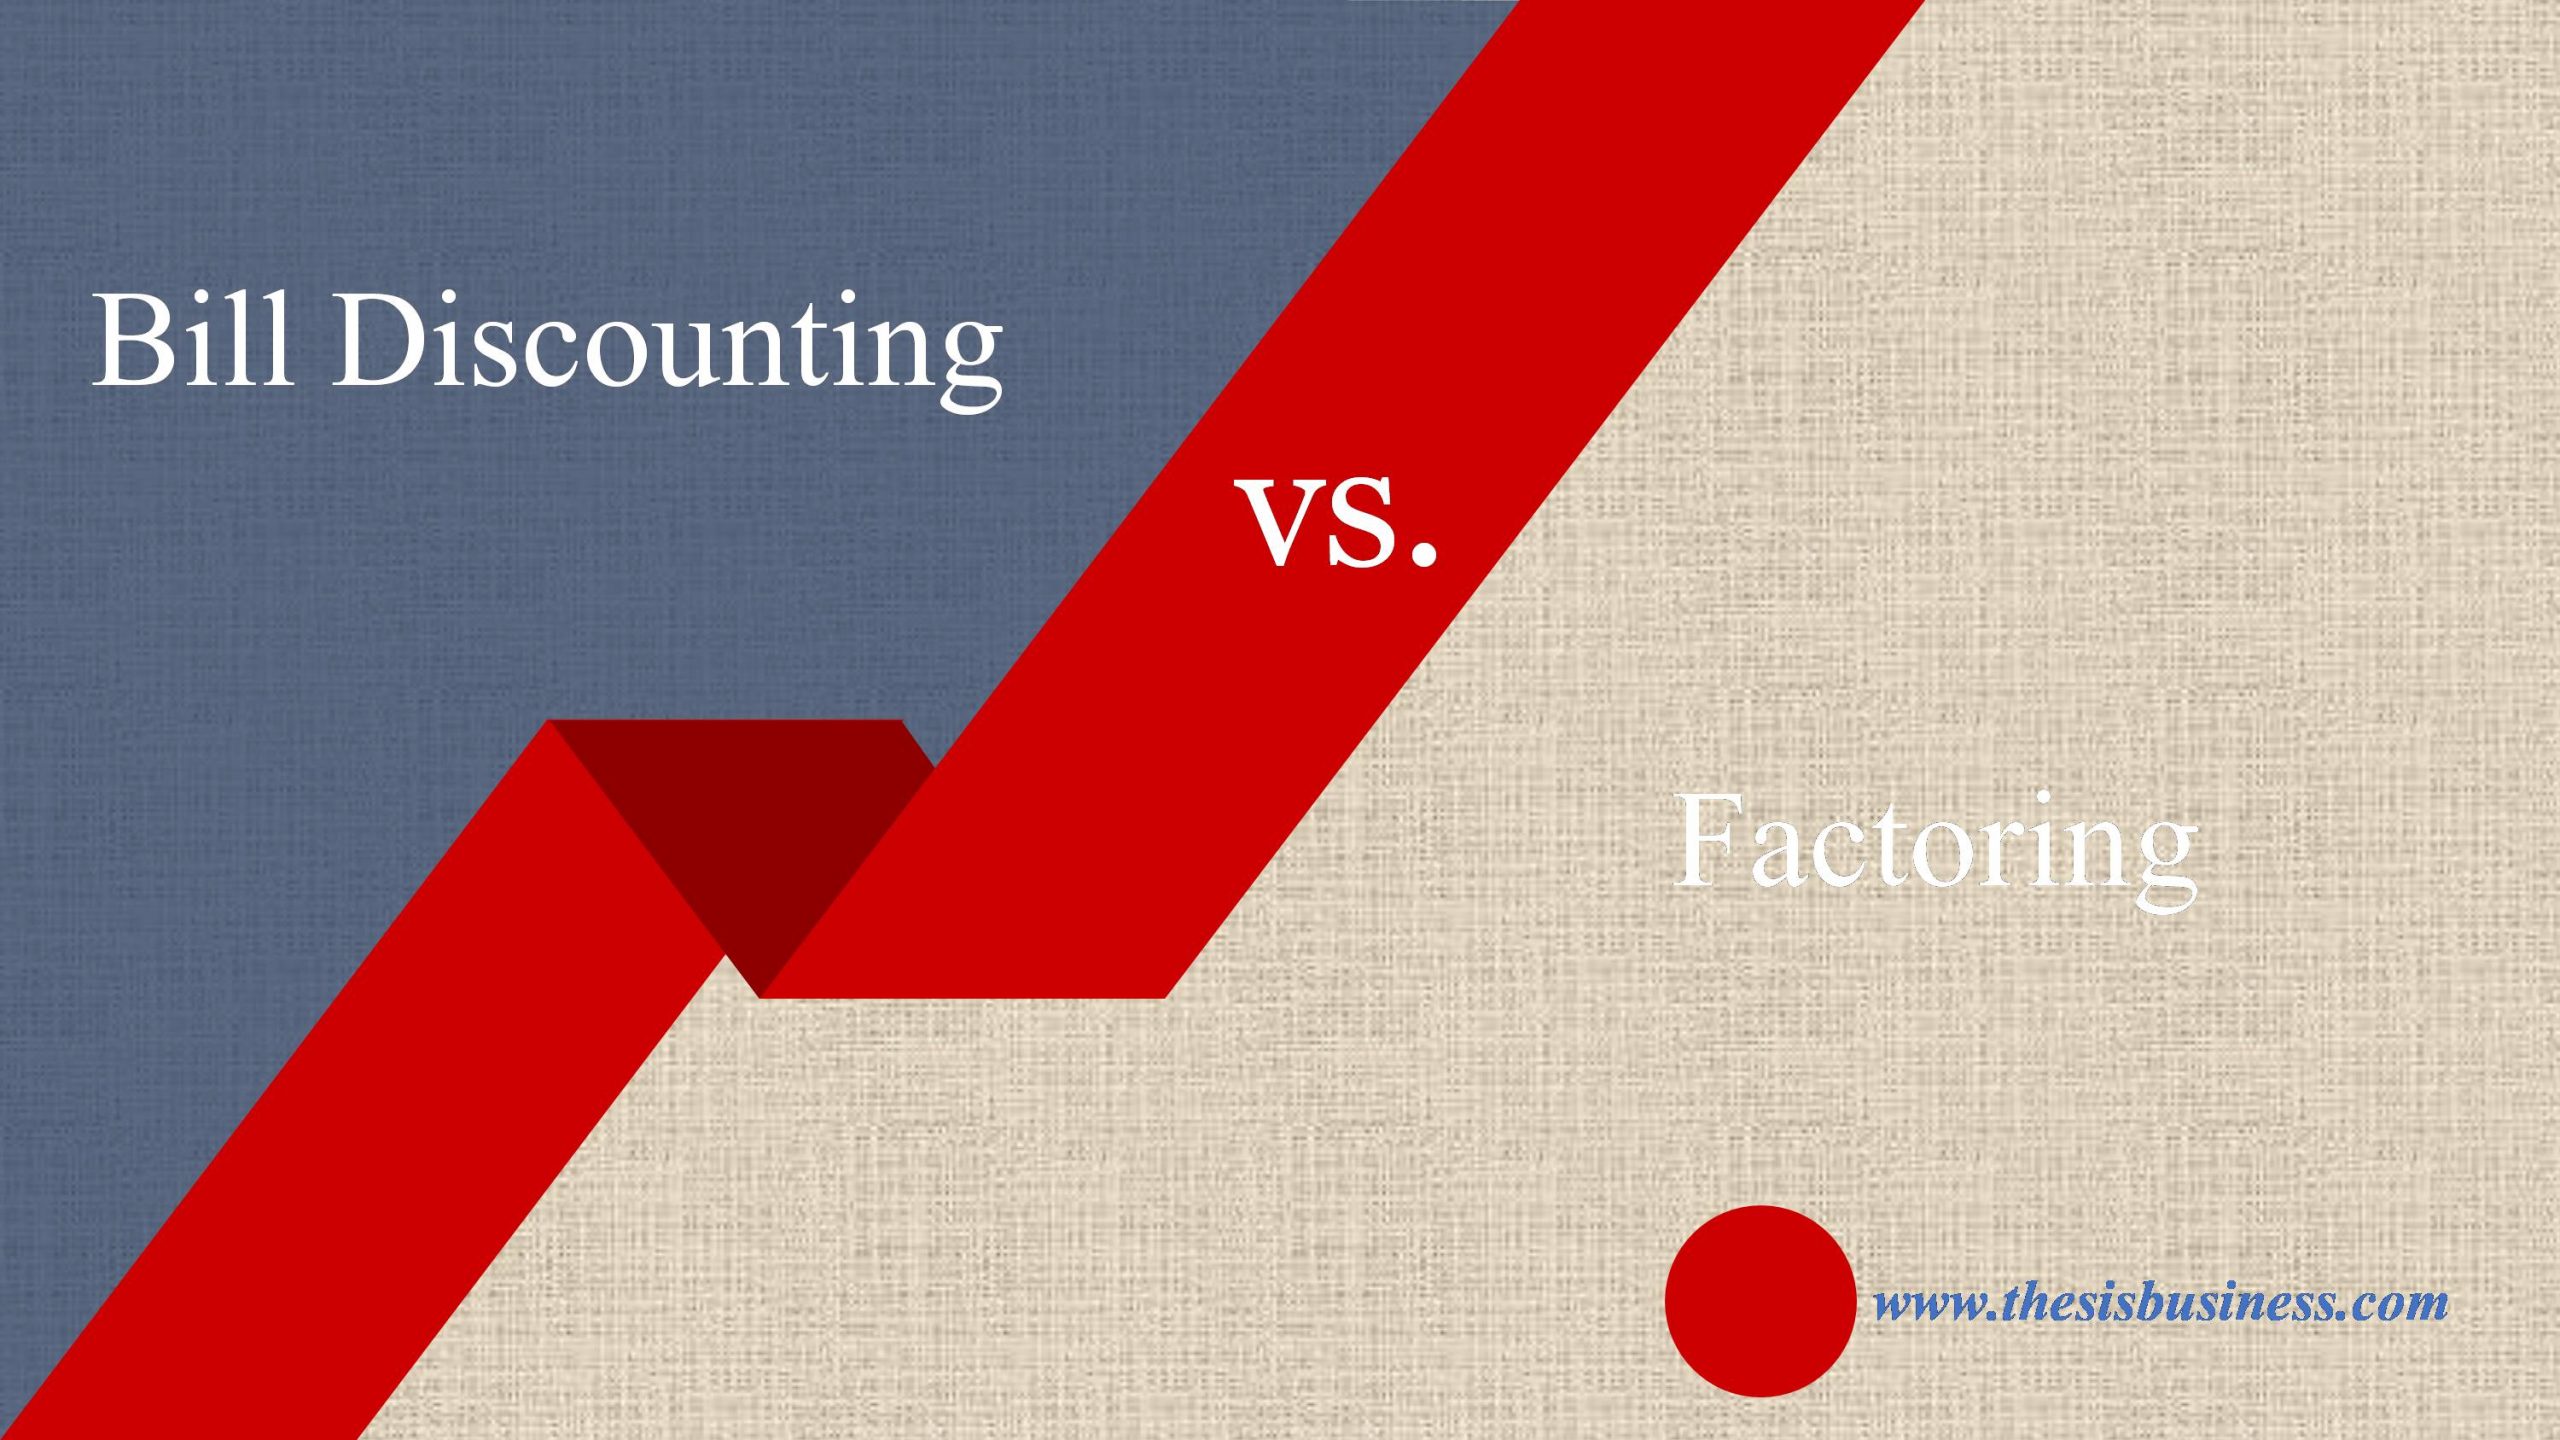 difference between Bill discounting and Factoring